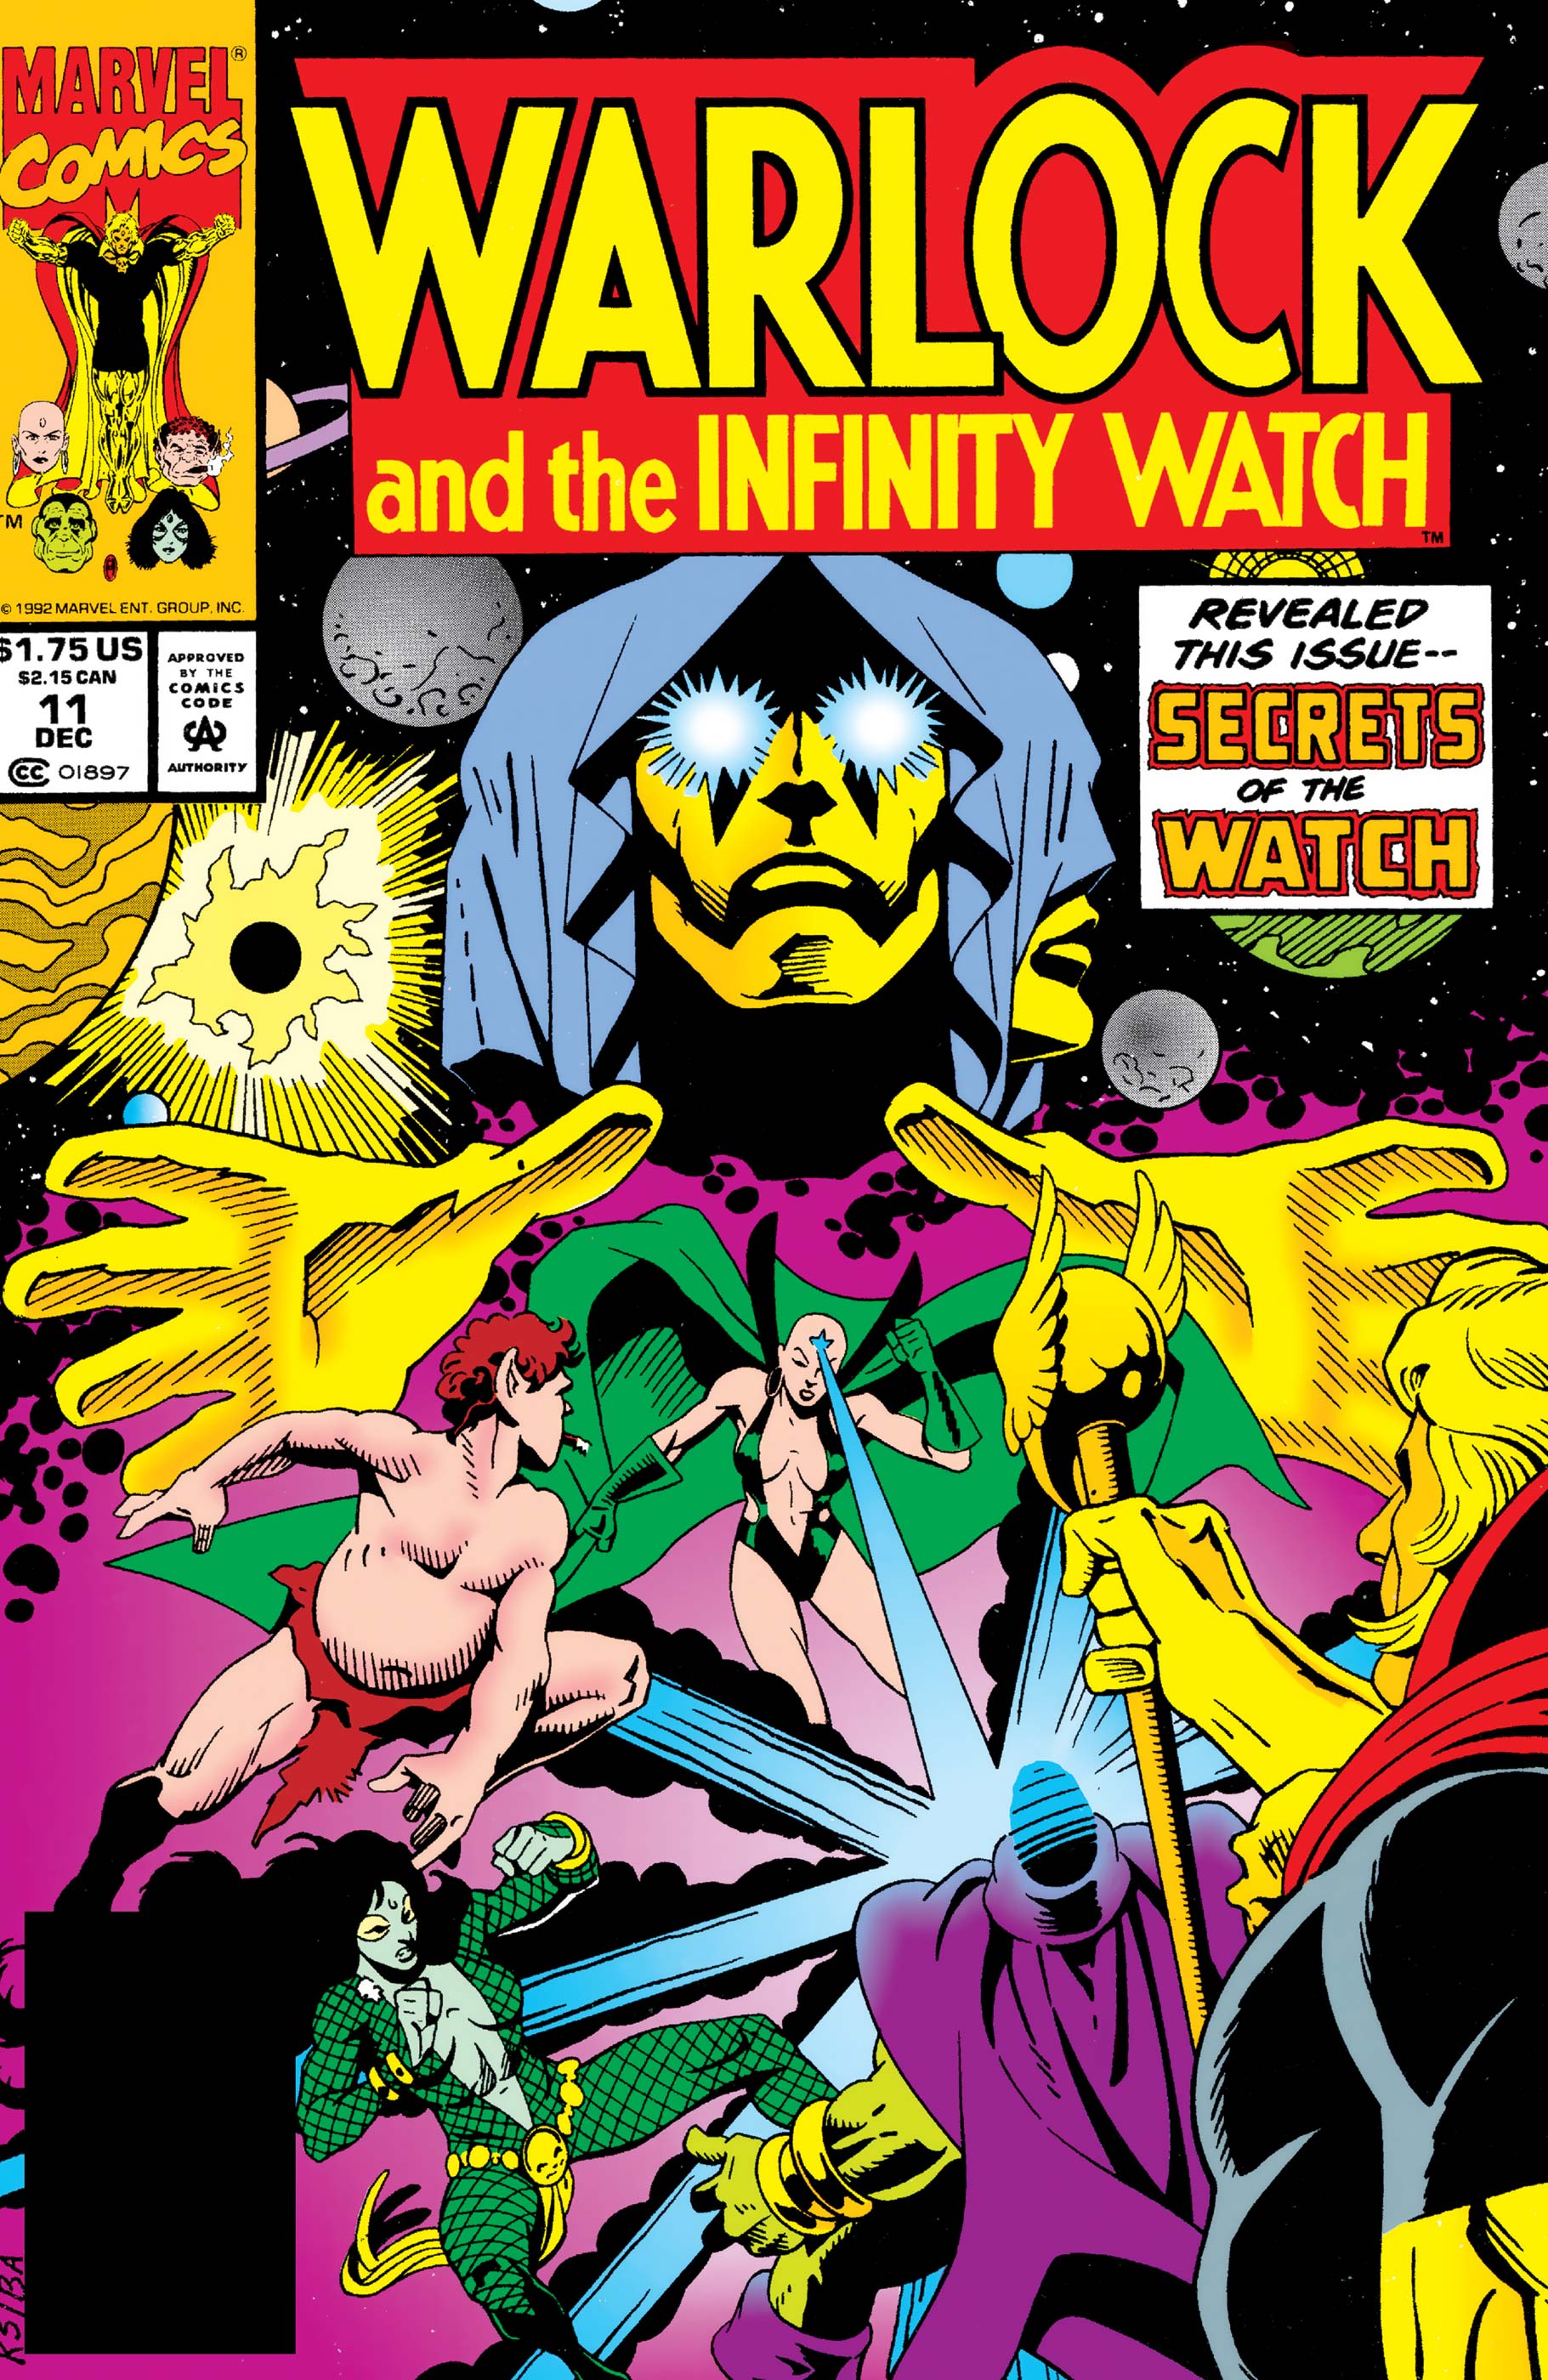 Warlock and the Infinity Watch (1992) #11 | Comic Issues | Marvel